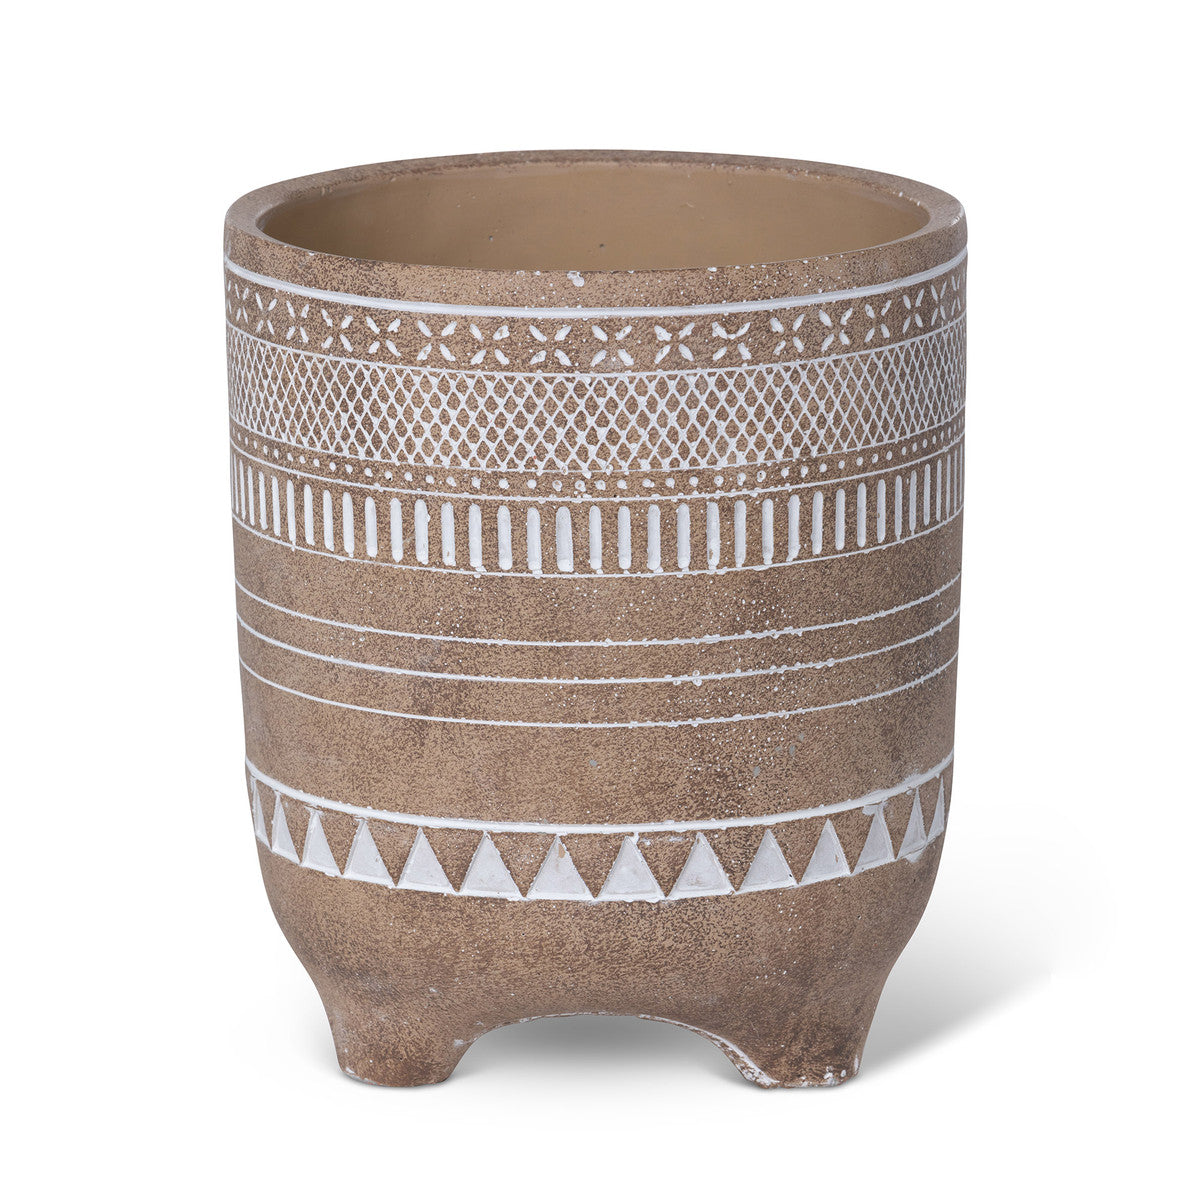 Yerma Footed Cement Pot - 8.5"